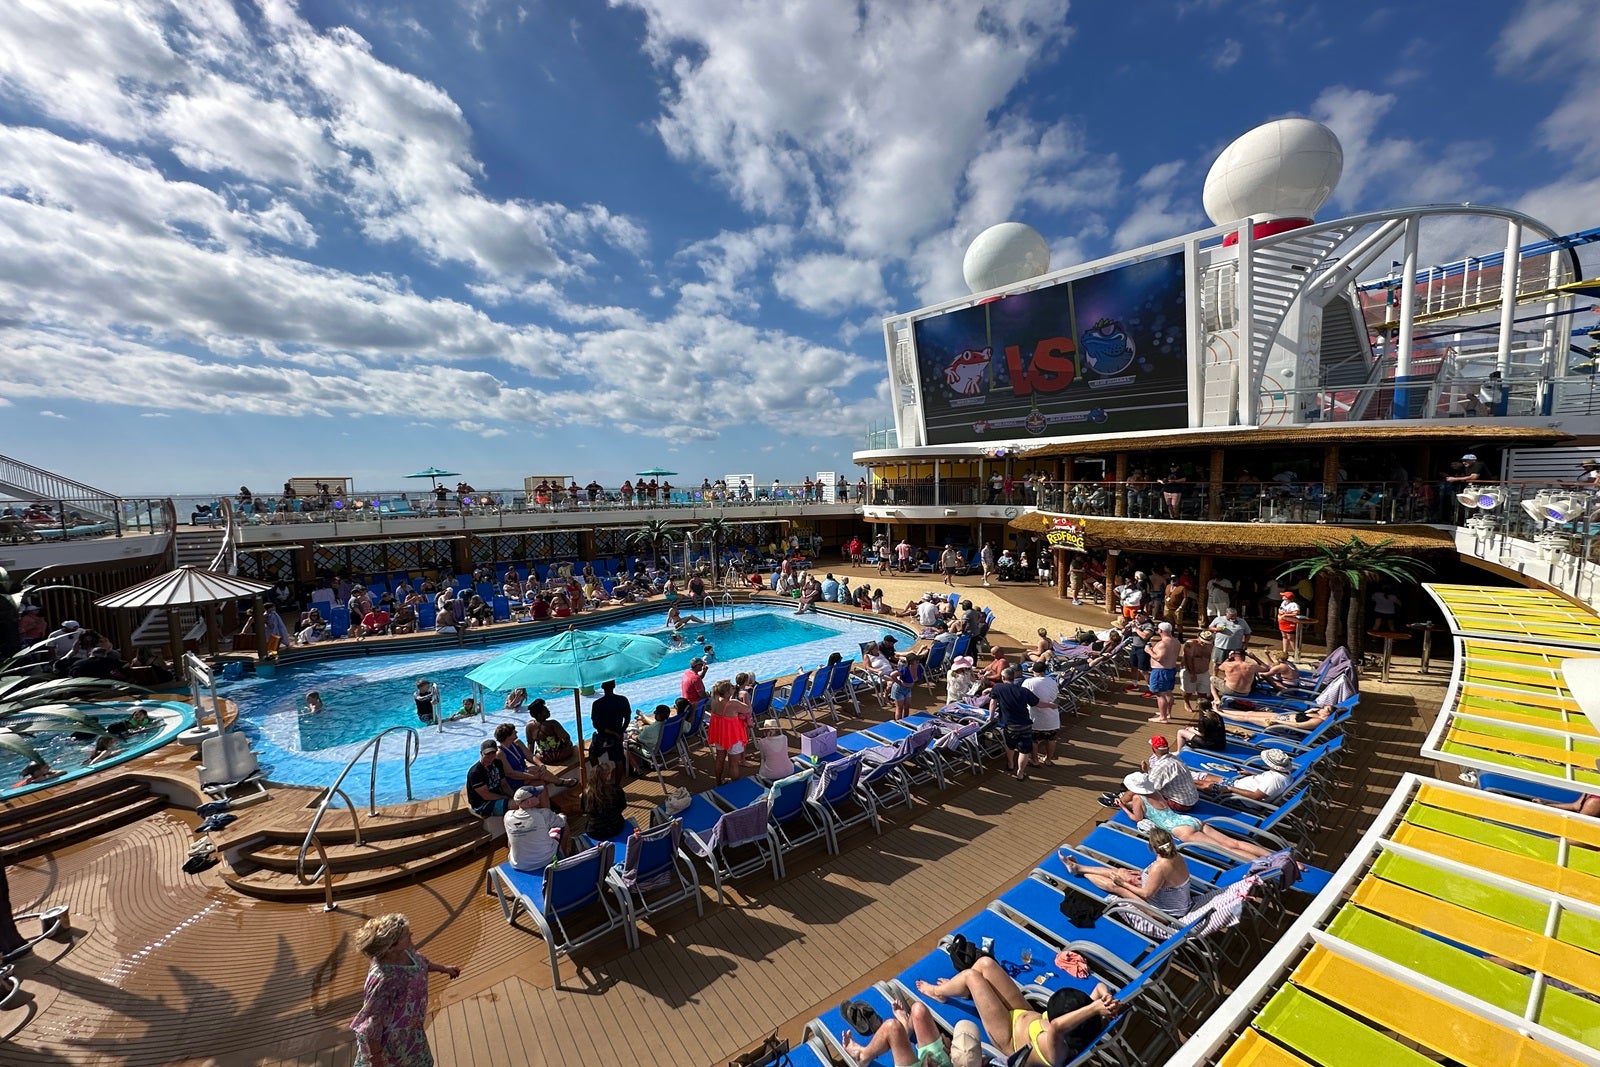 View of a cruise ship pool deck from above